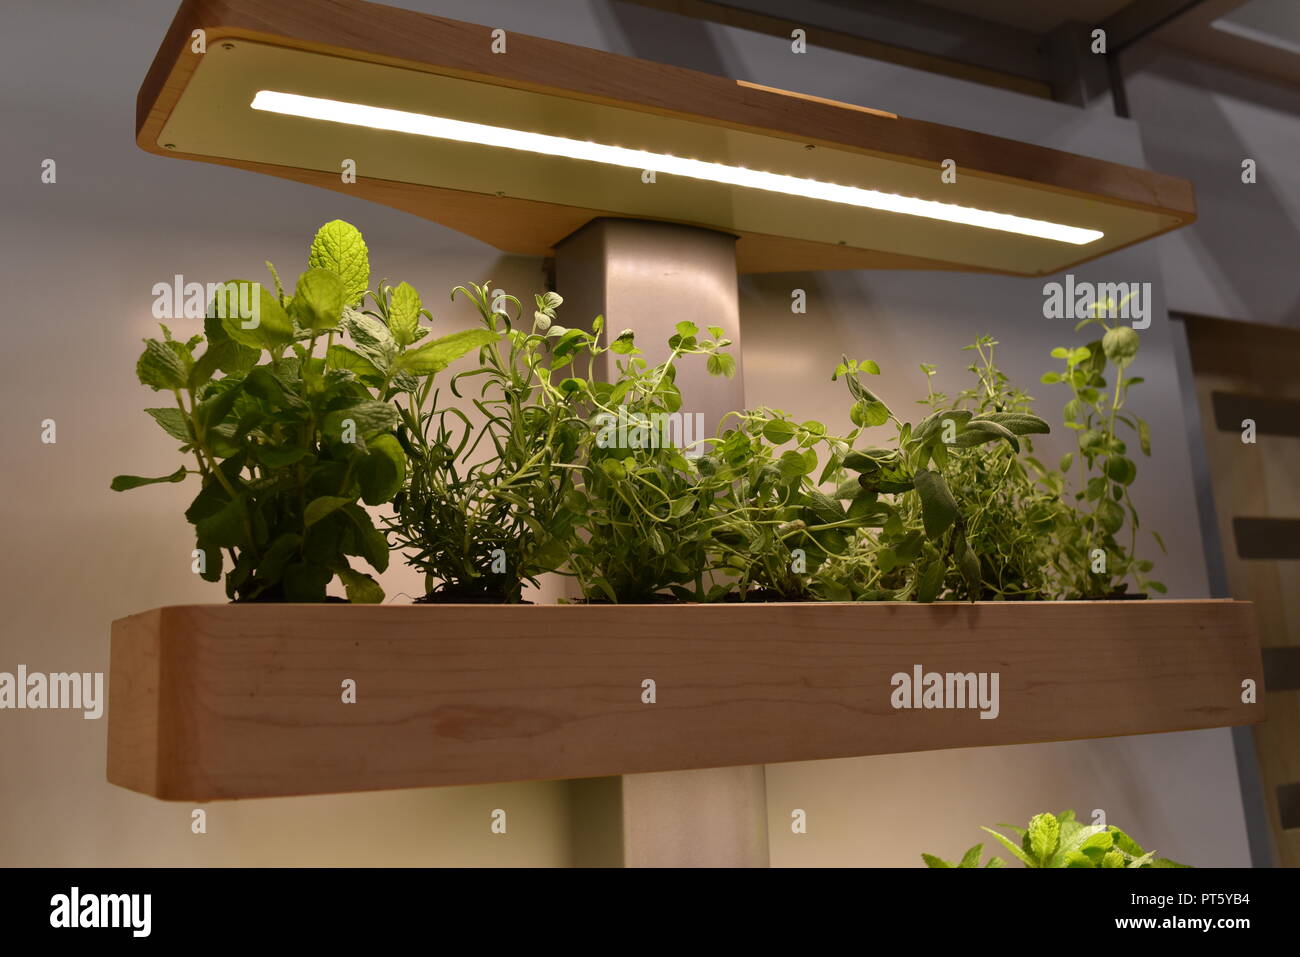 Indoor soil-free gardens with herb plants and vegetables, producing food, on display at the Consumer Electronics Show (CES) in Las Vegas, NV, USA. Stock Photo